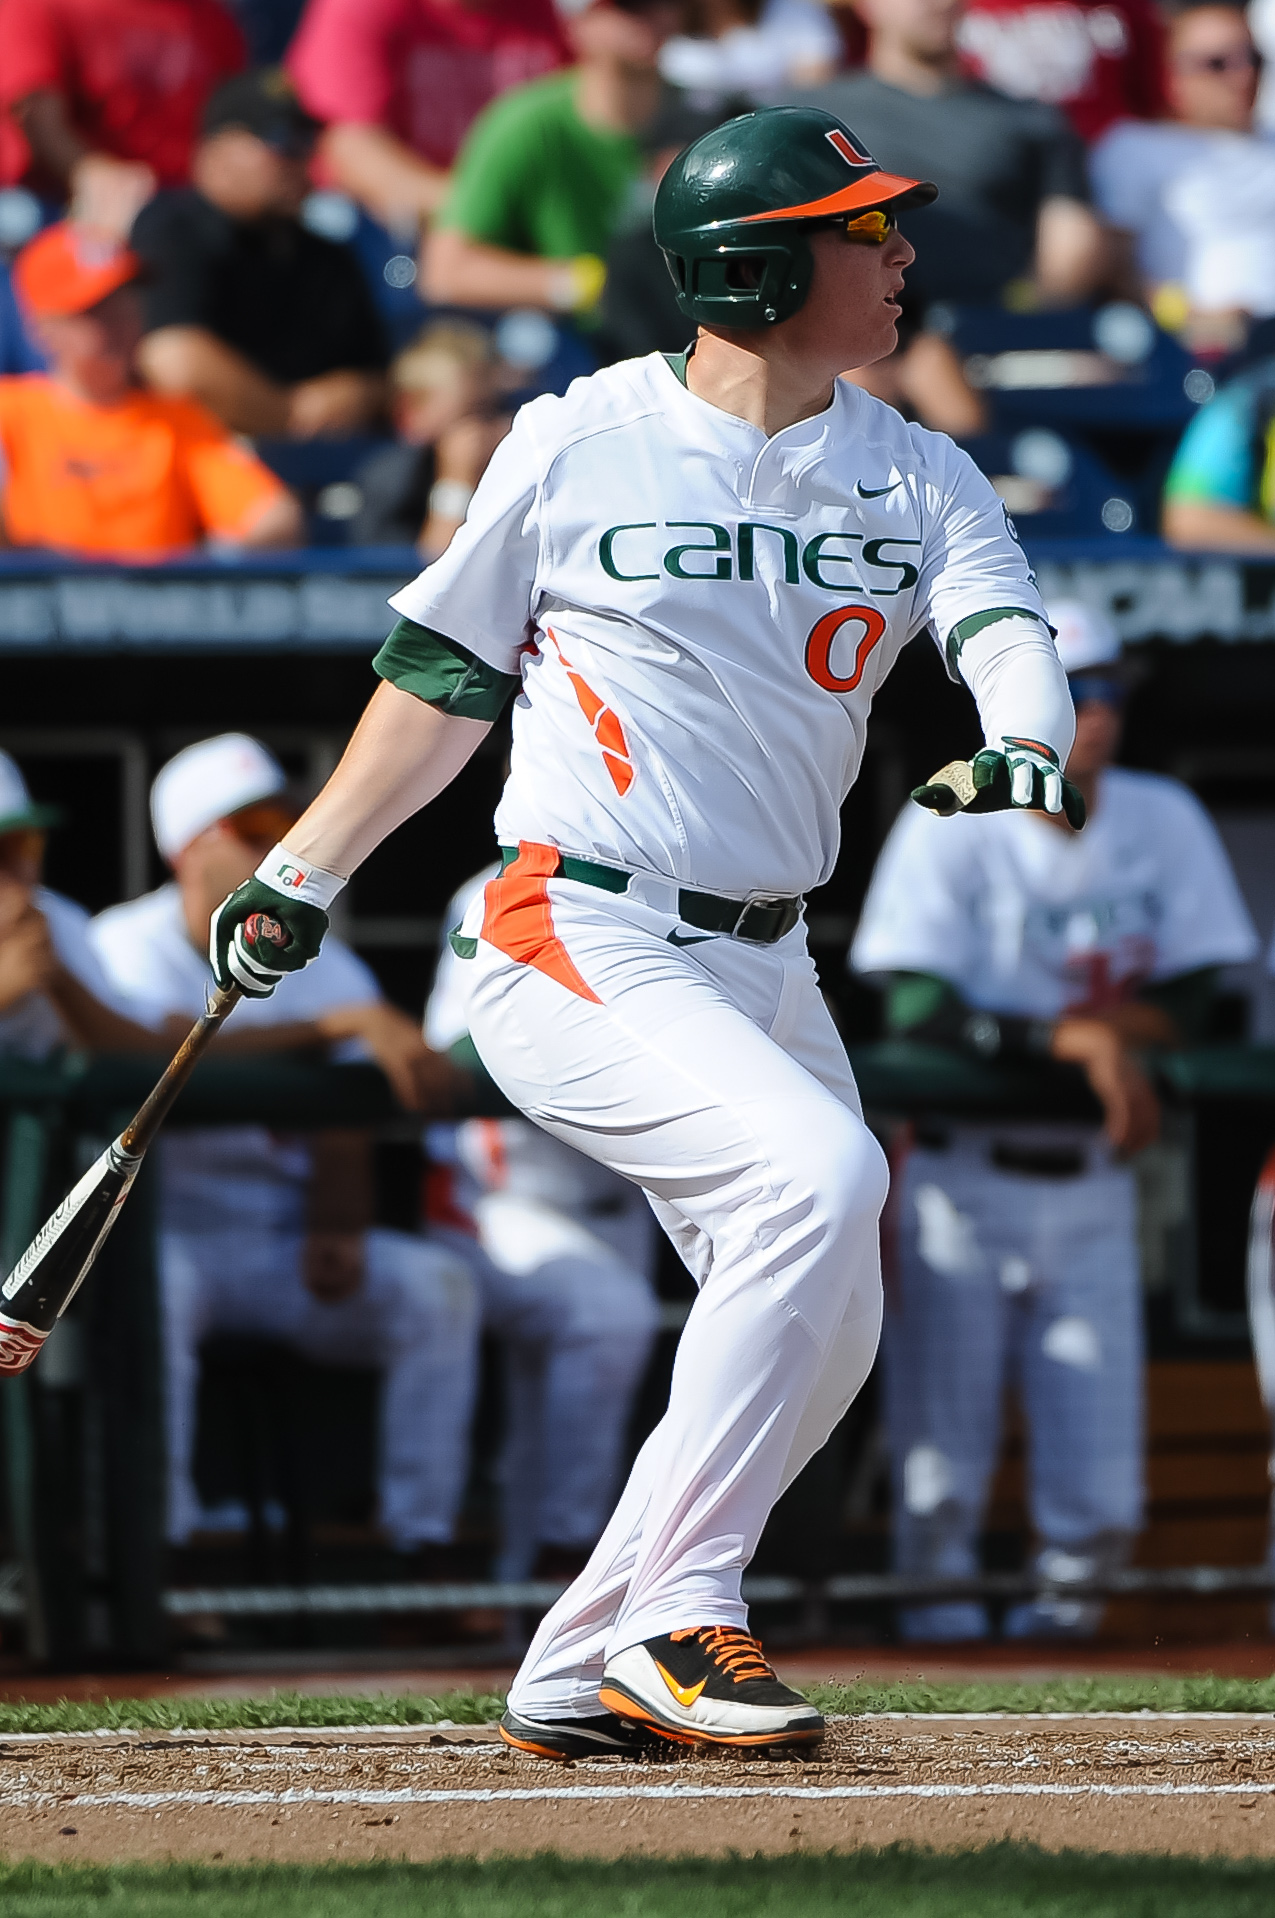 University of Miami catcher Zack Collins could end up in a Cleveland jersey on Thursday.